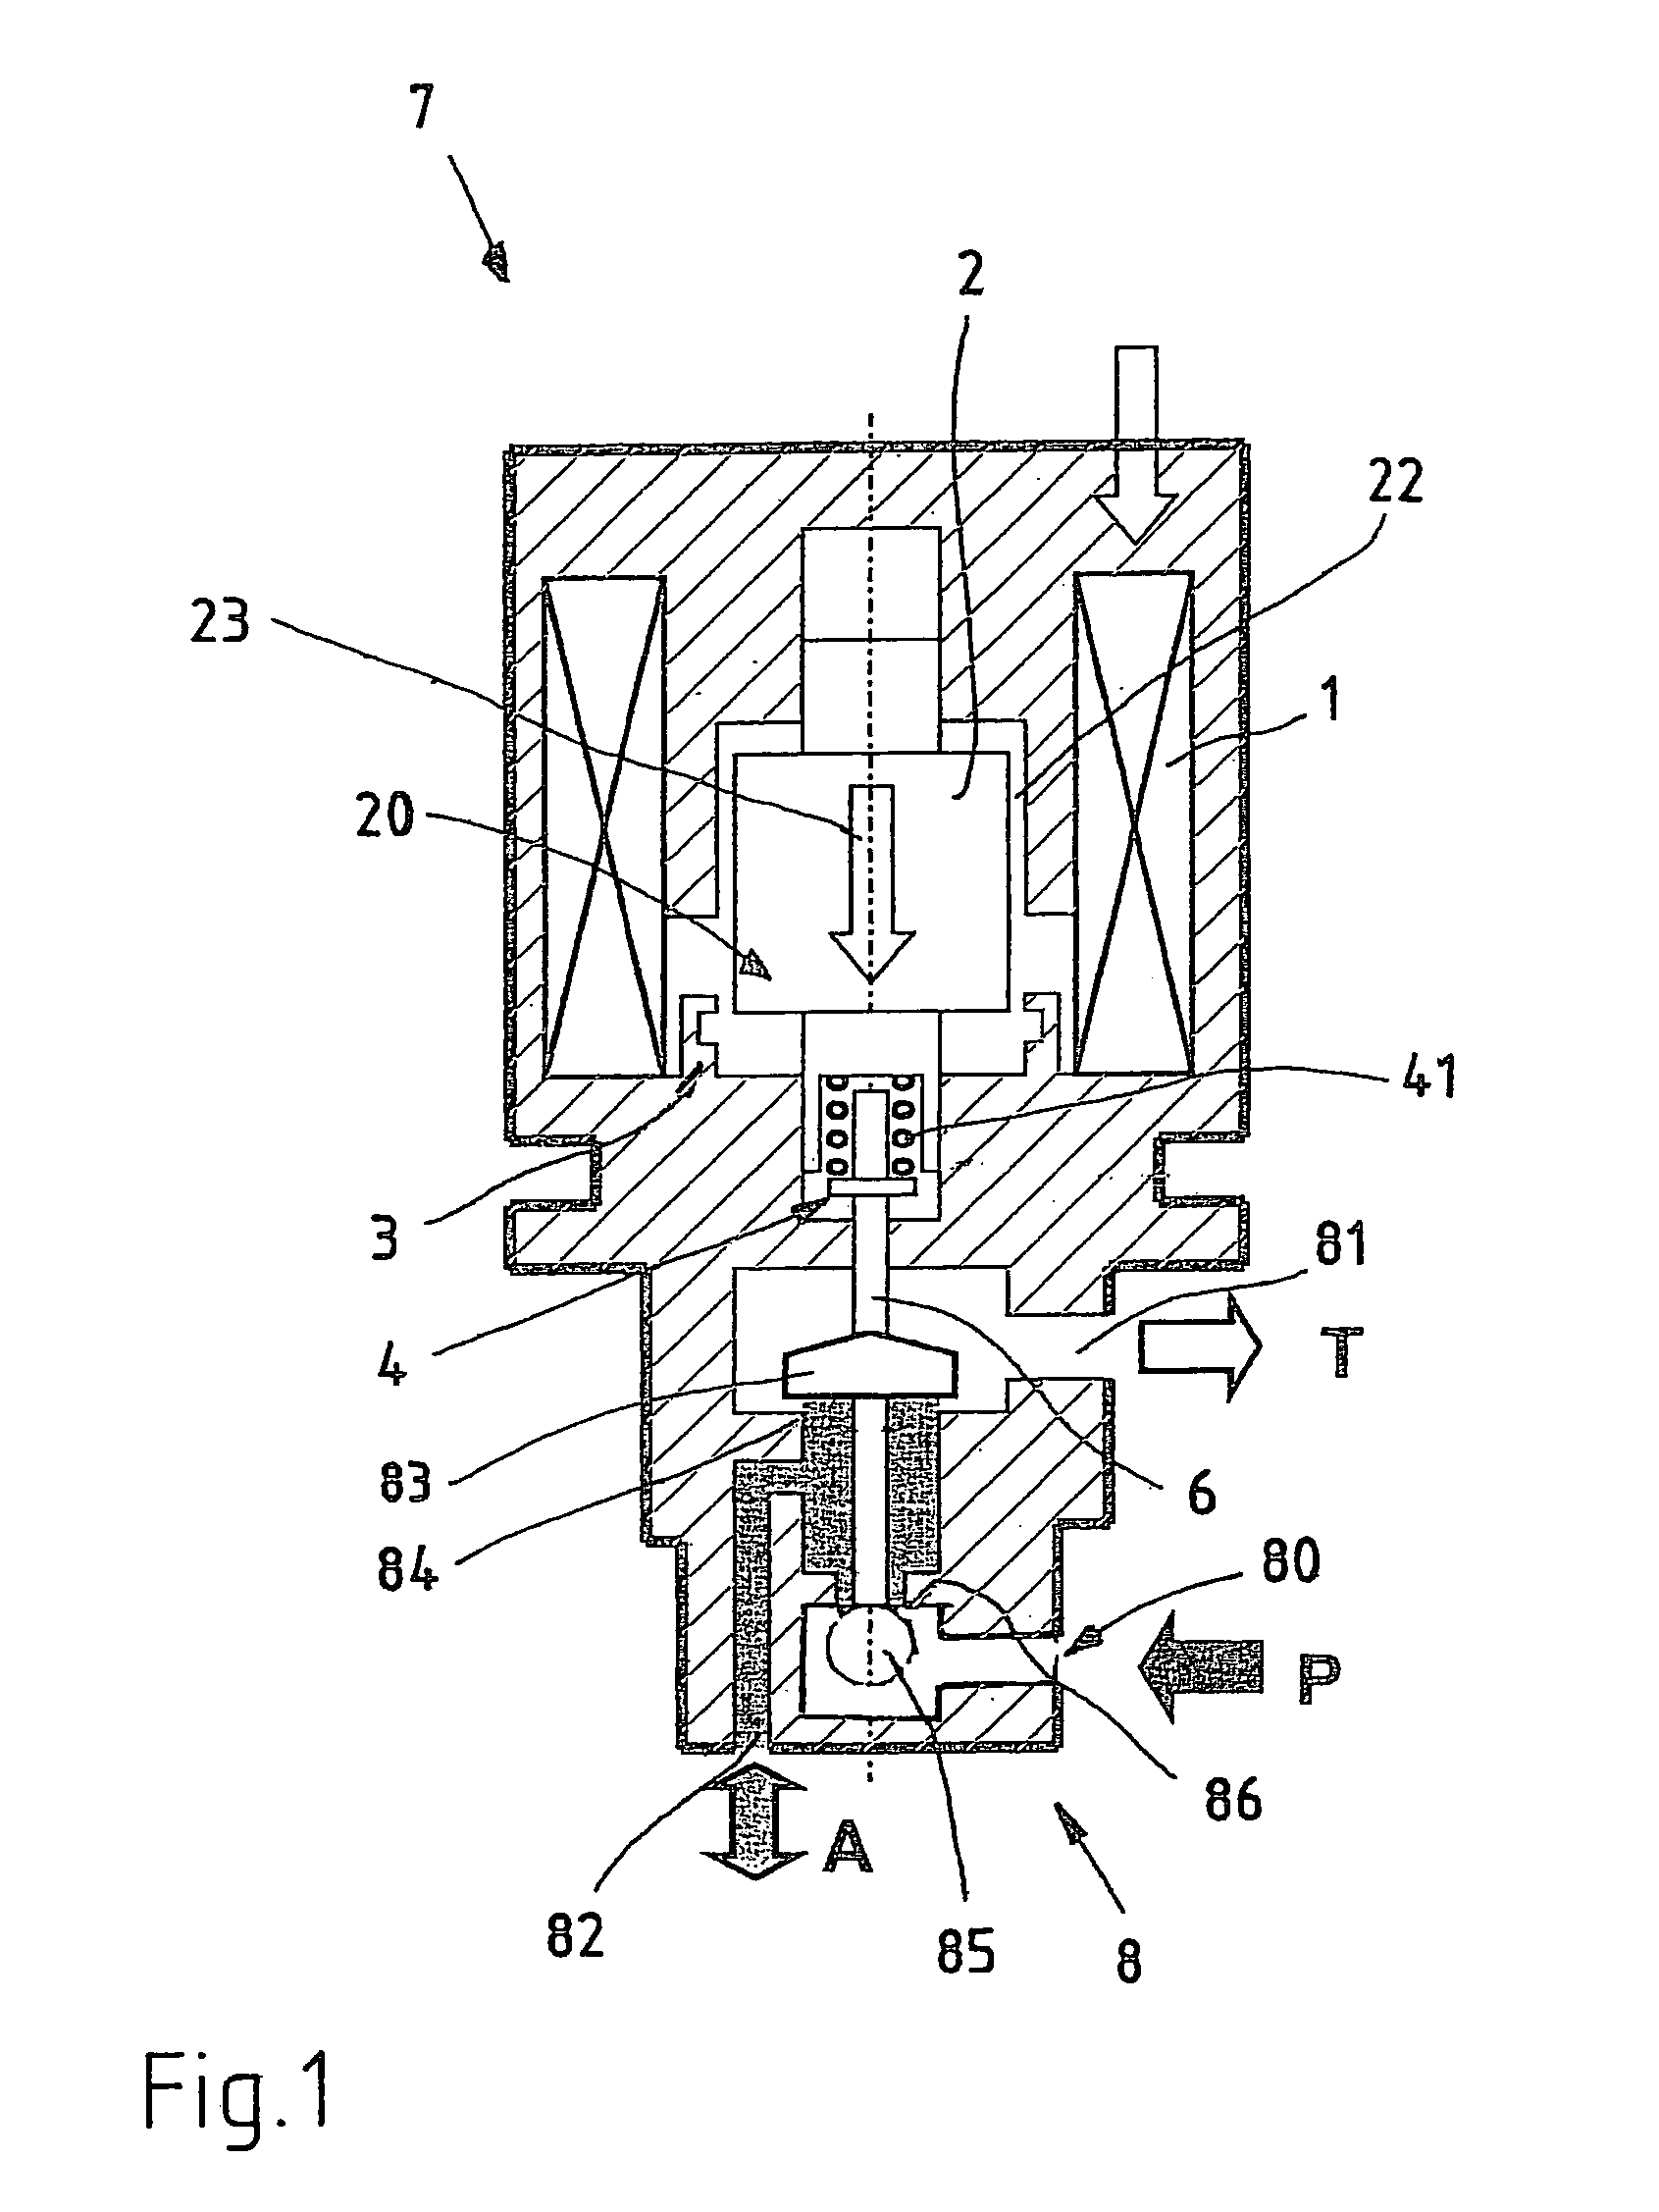 Solenoid with path converter